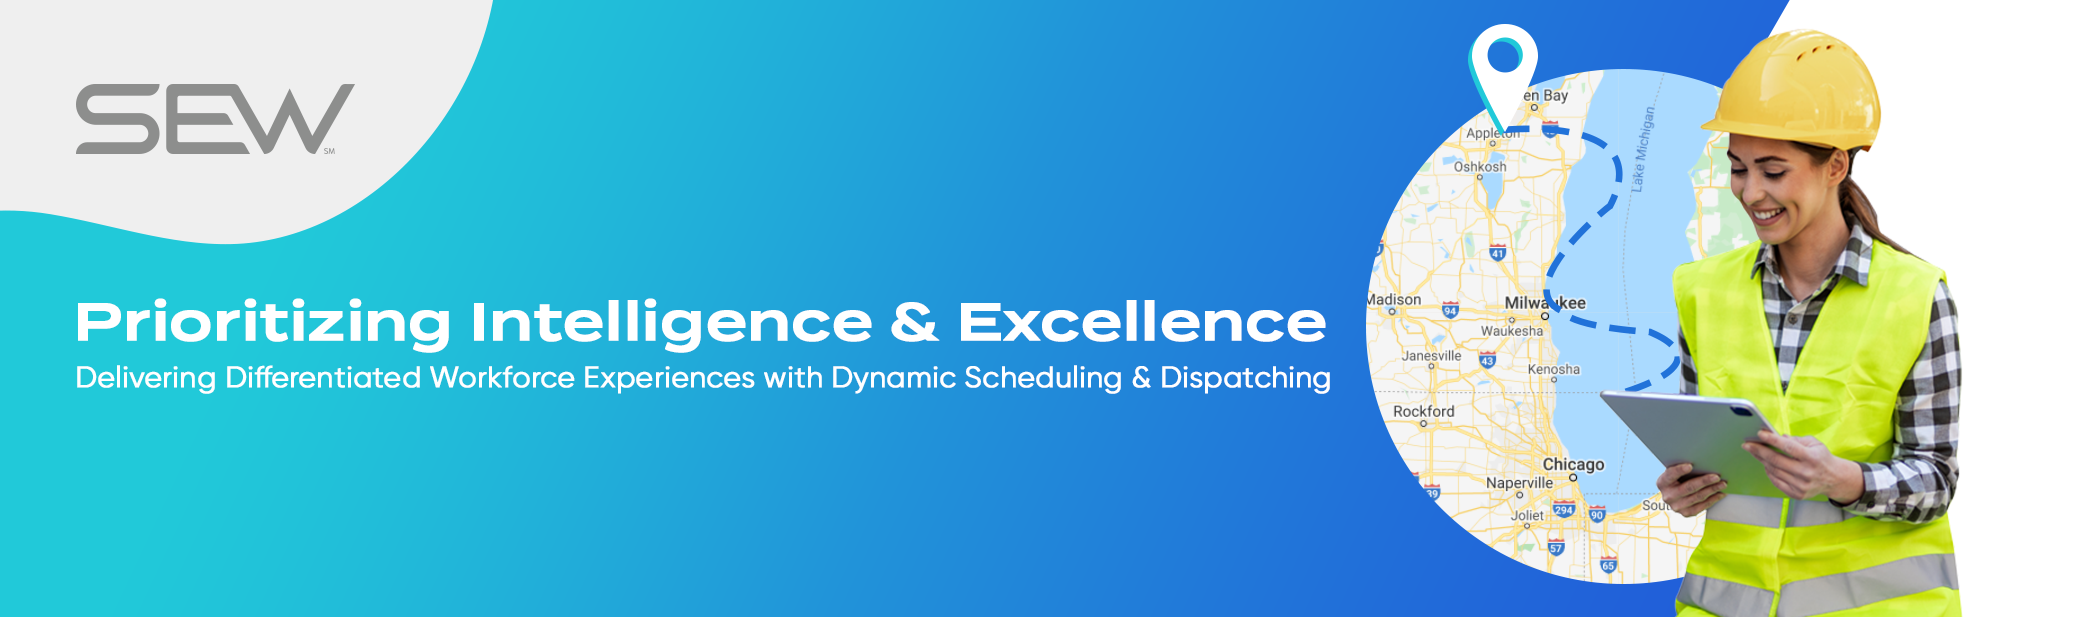 Prioritizing Intelligence & Excellence: Delivering Differentiated Workforce Experiences with Dynamic Scheduling & Dispatching